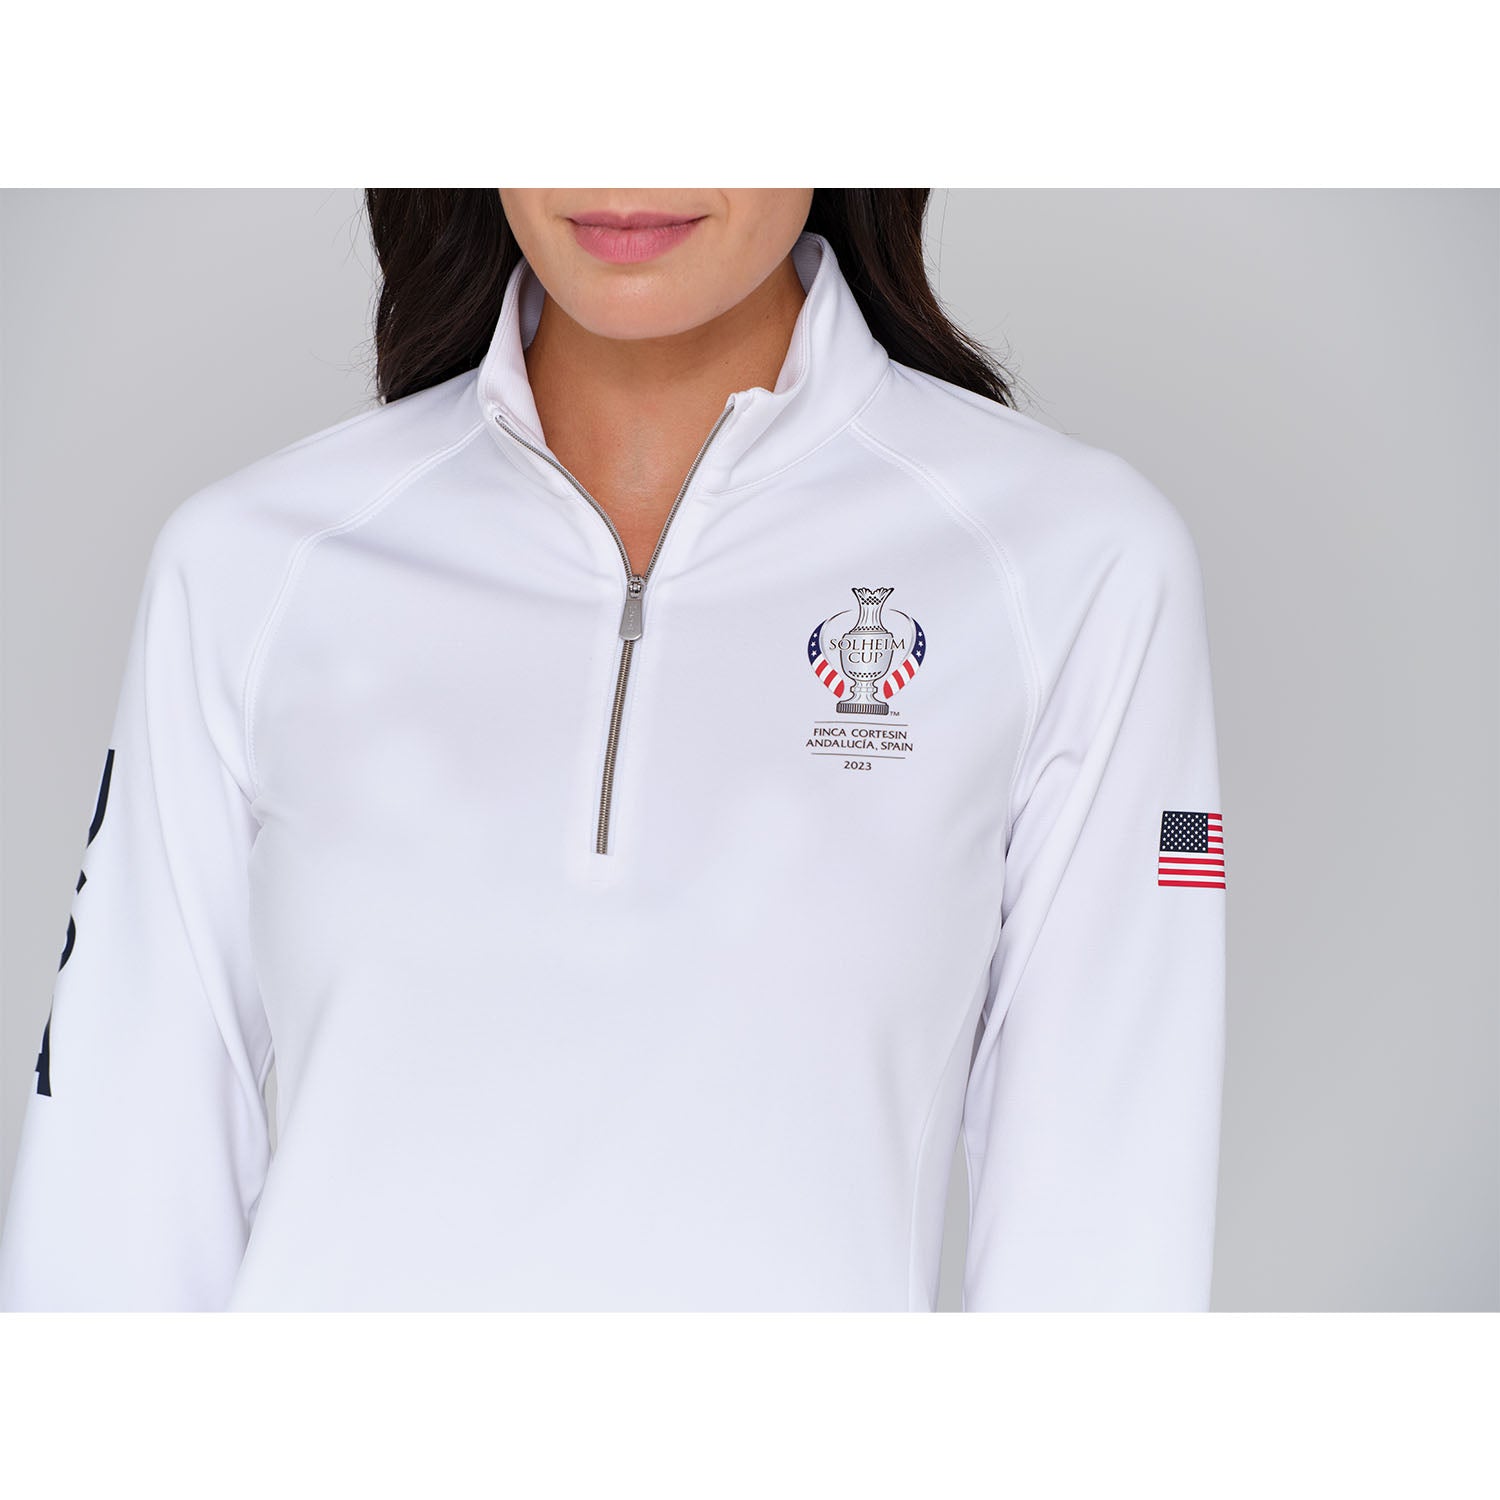 Dunning 2023 LPGA Official Solheim Cup Team Uniform Women's Player Jersey Performance Quarter Zip in White - Zoomed in Lifestyle Front View